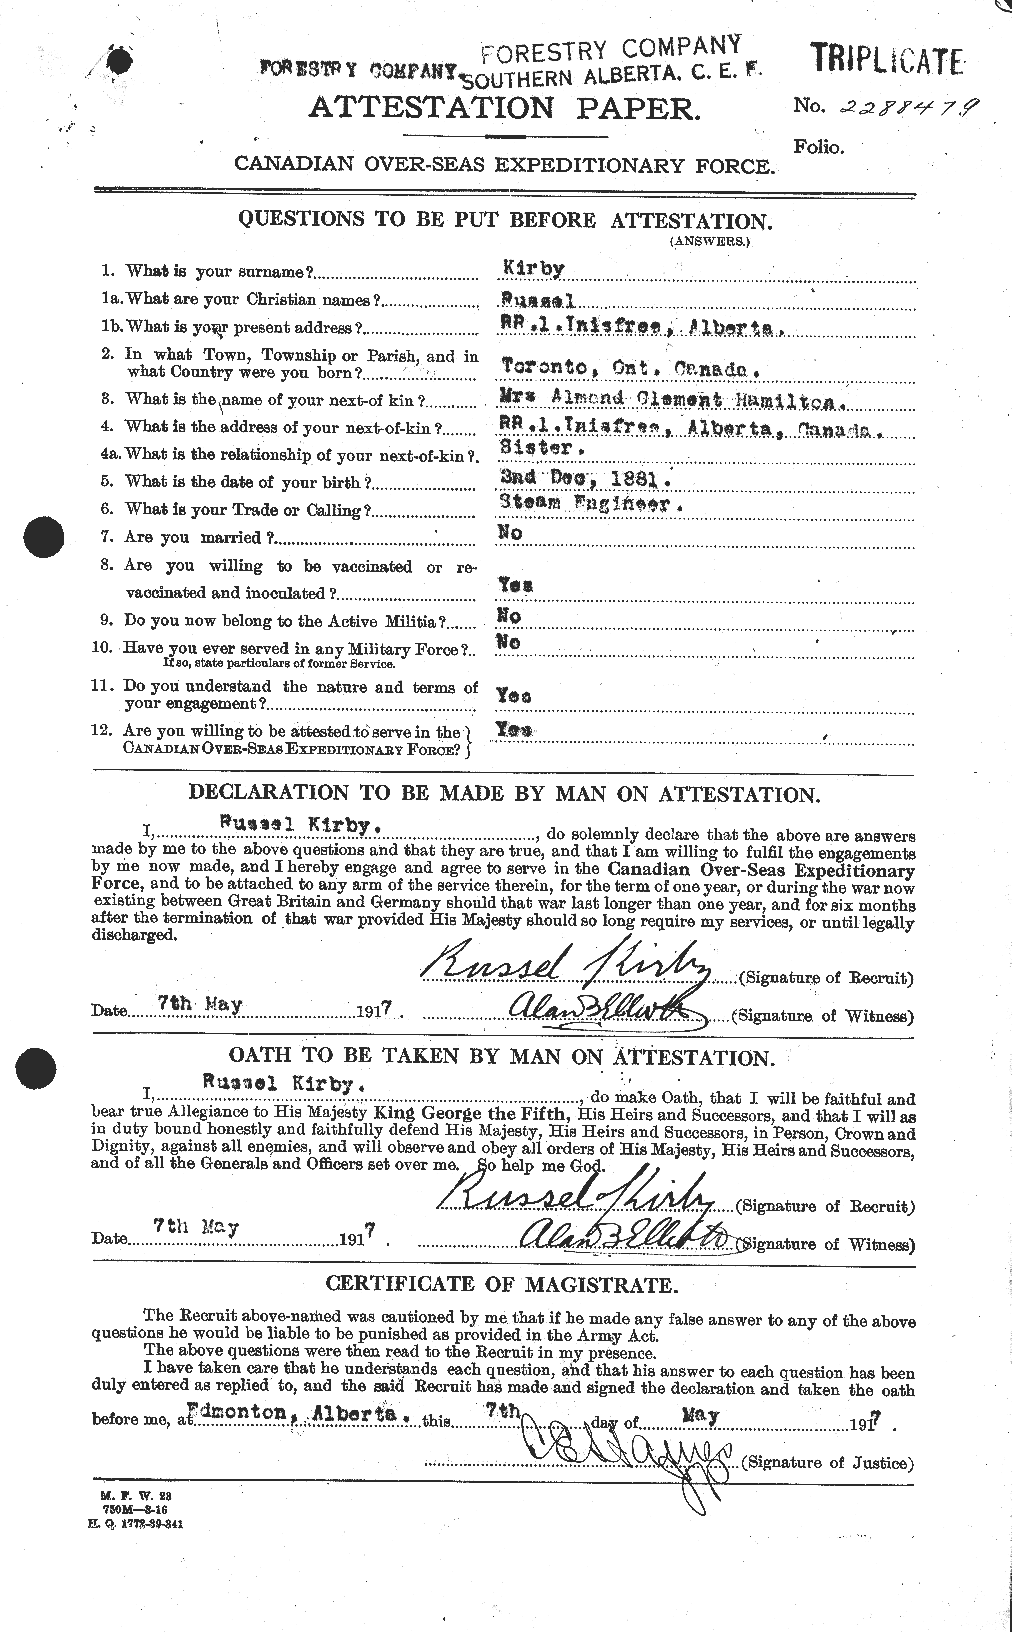 Personnel Records of the First World War - CEF 437271a